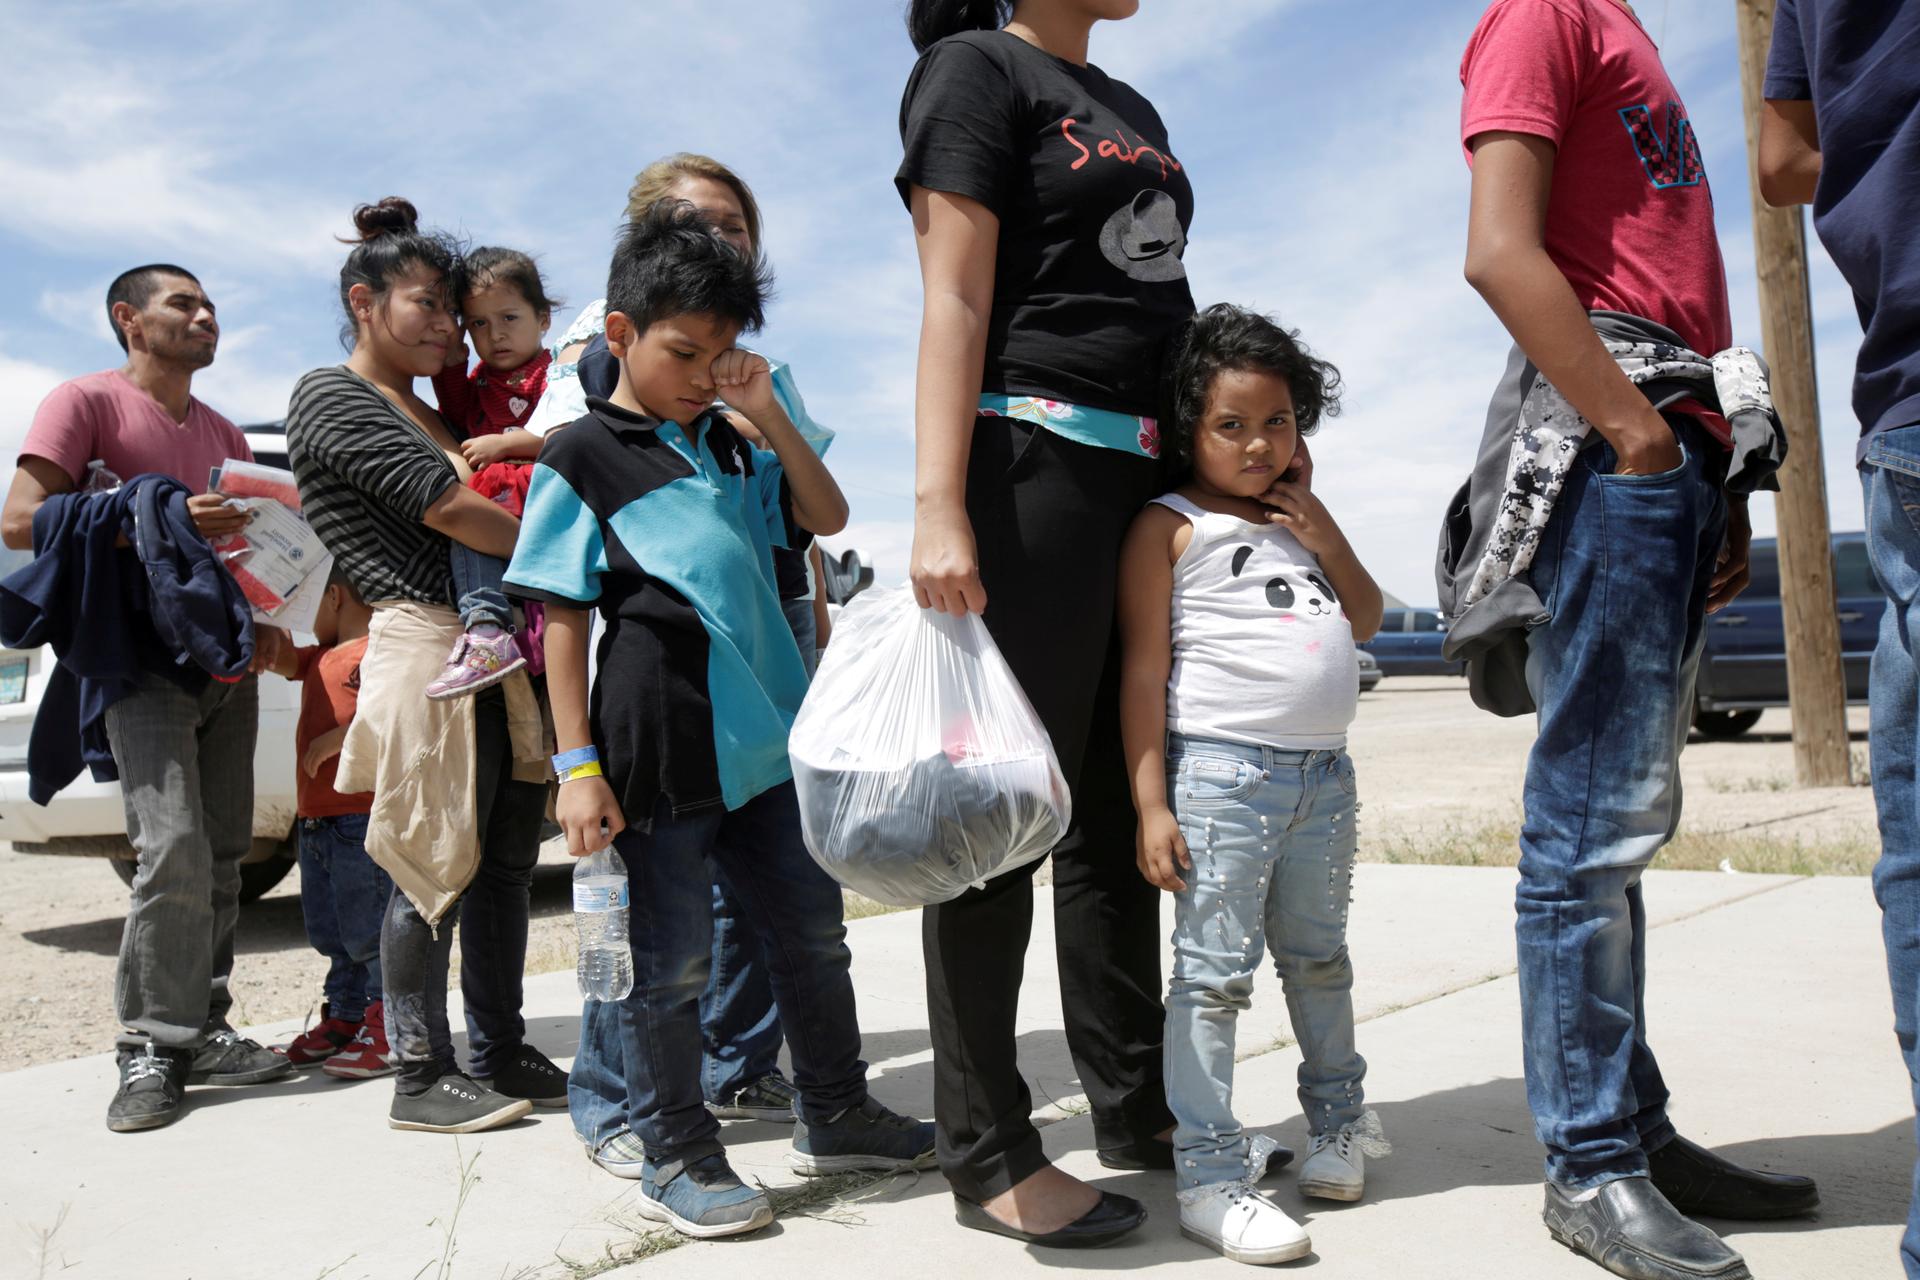 Central American migrants stand in line before entering a temporary shelter, after illegally crossing the border between Mexico and the U.S., in Deming, New Mexico, on May 16, 2019.